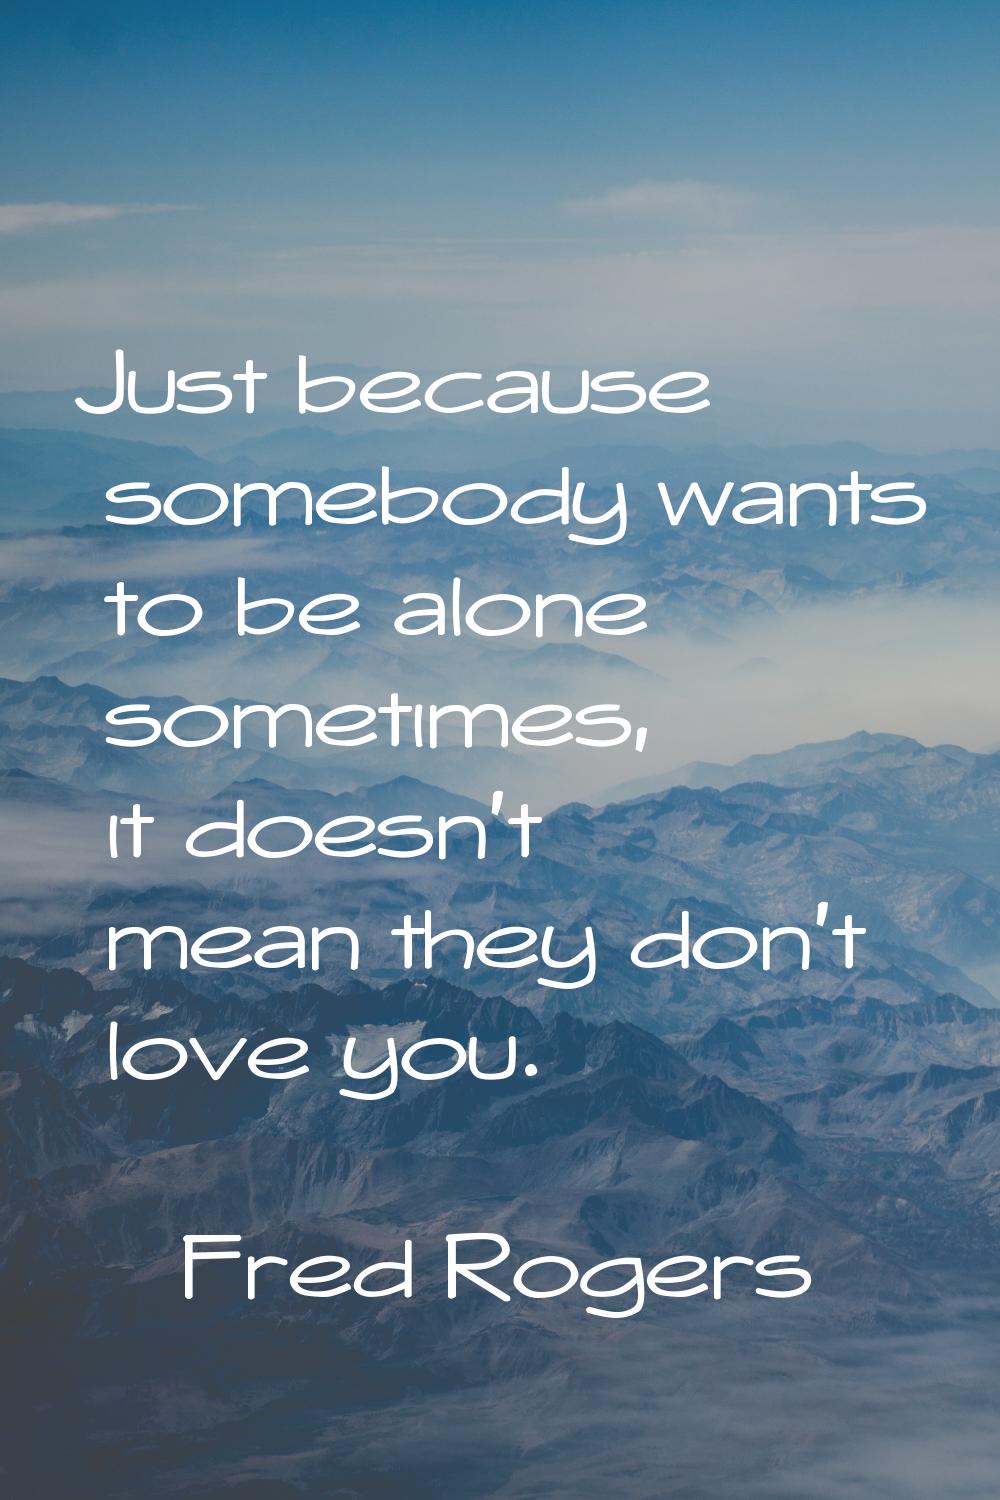 Just because somebody wants to be alone sometimes, it doesn't mean they don't love you.